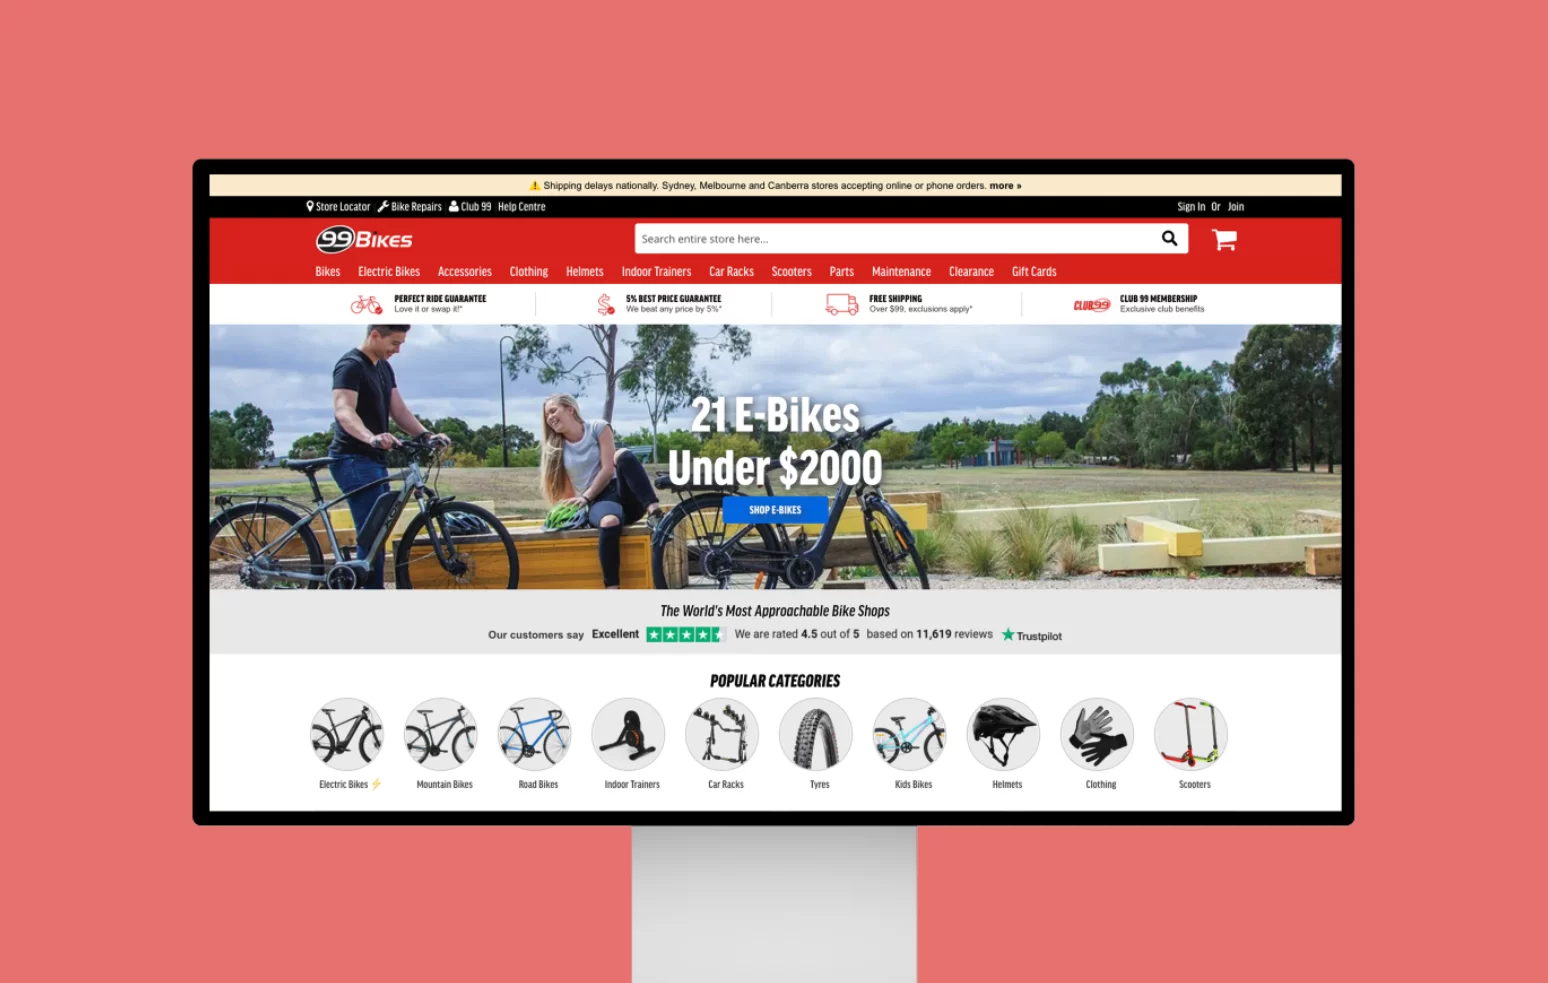 Redesigning and revitalising 99Bikes online presence.